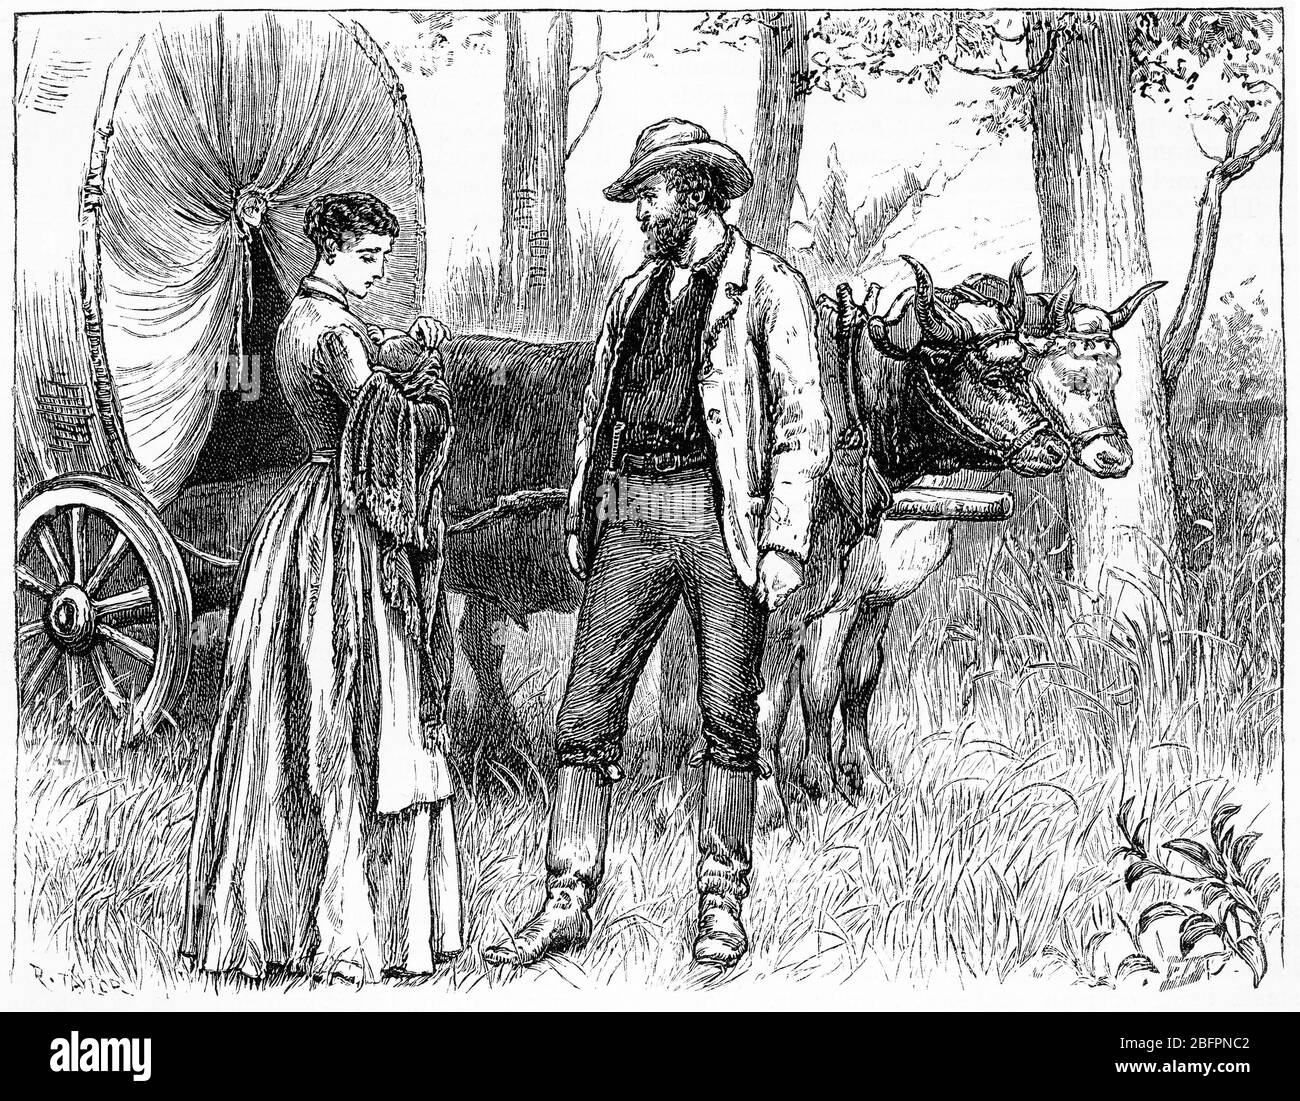 Engraving of a pioneering family and their ox cart in the days of the American wild west Stock Photo